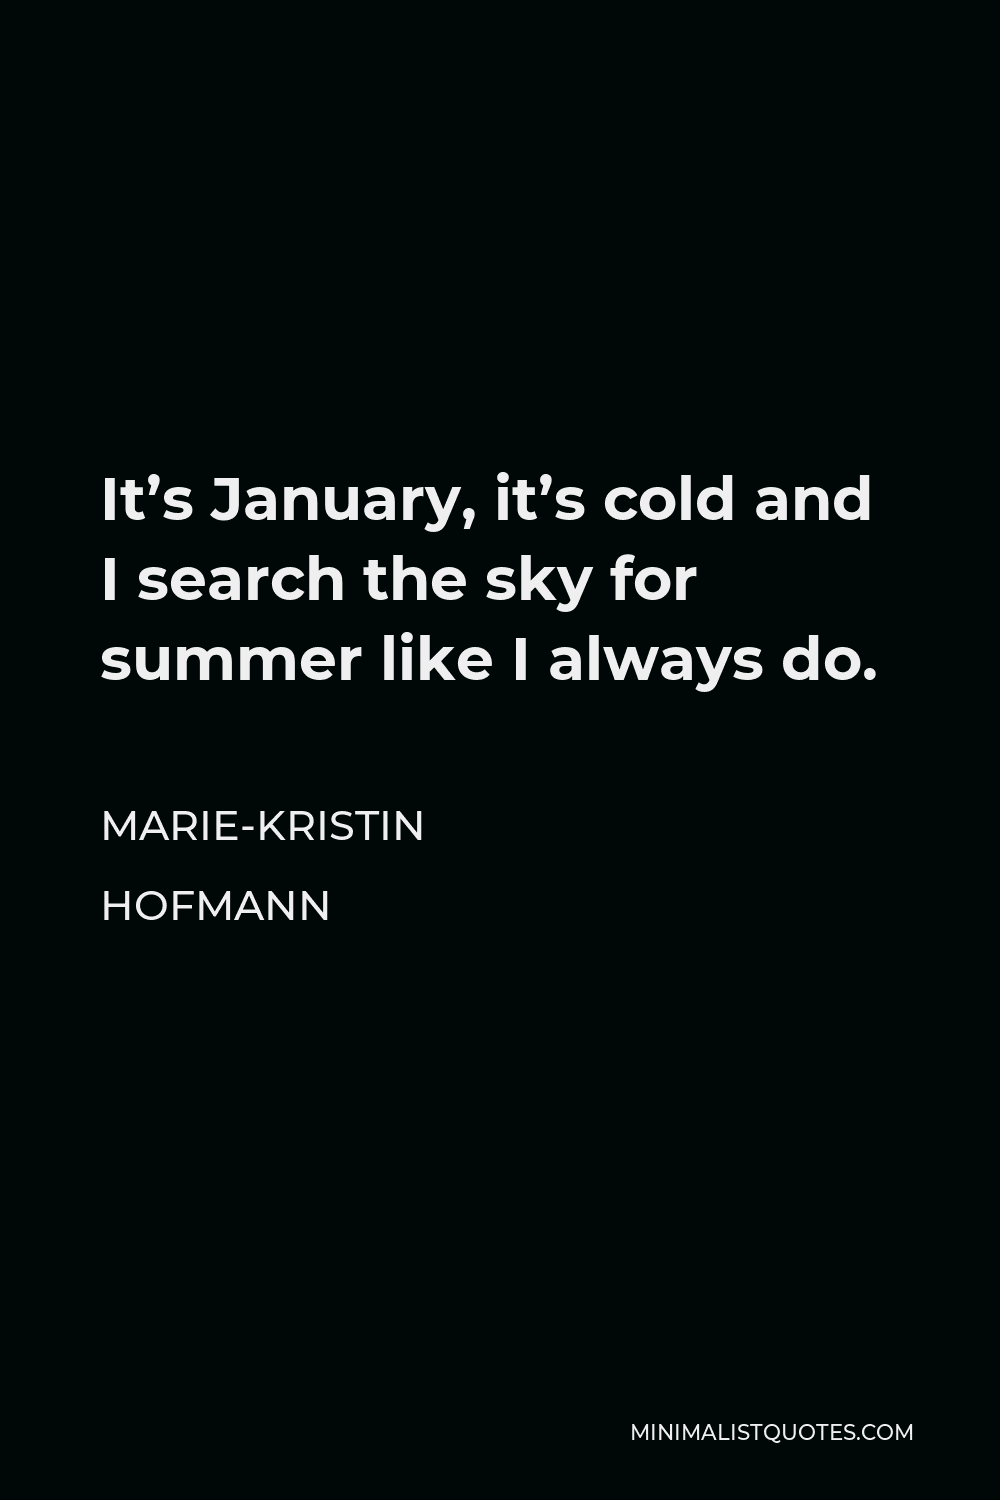 Marie-Kristin Hofmann Quote - It’s January, it’s cold and I search the sky for summer like I always do.